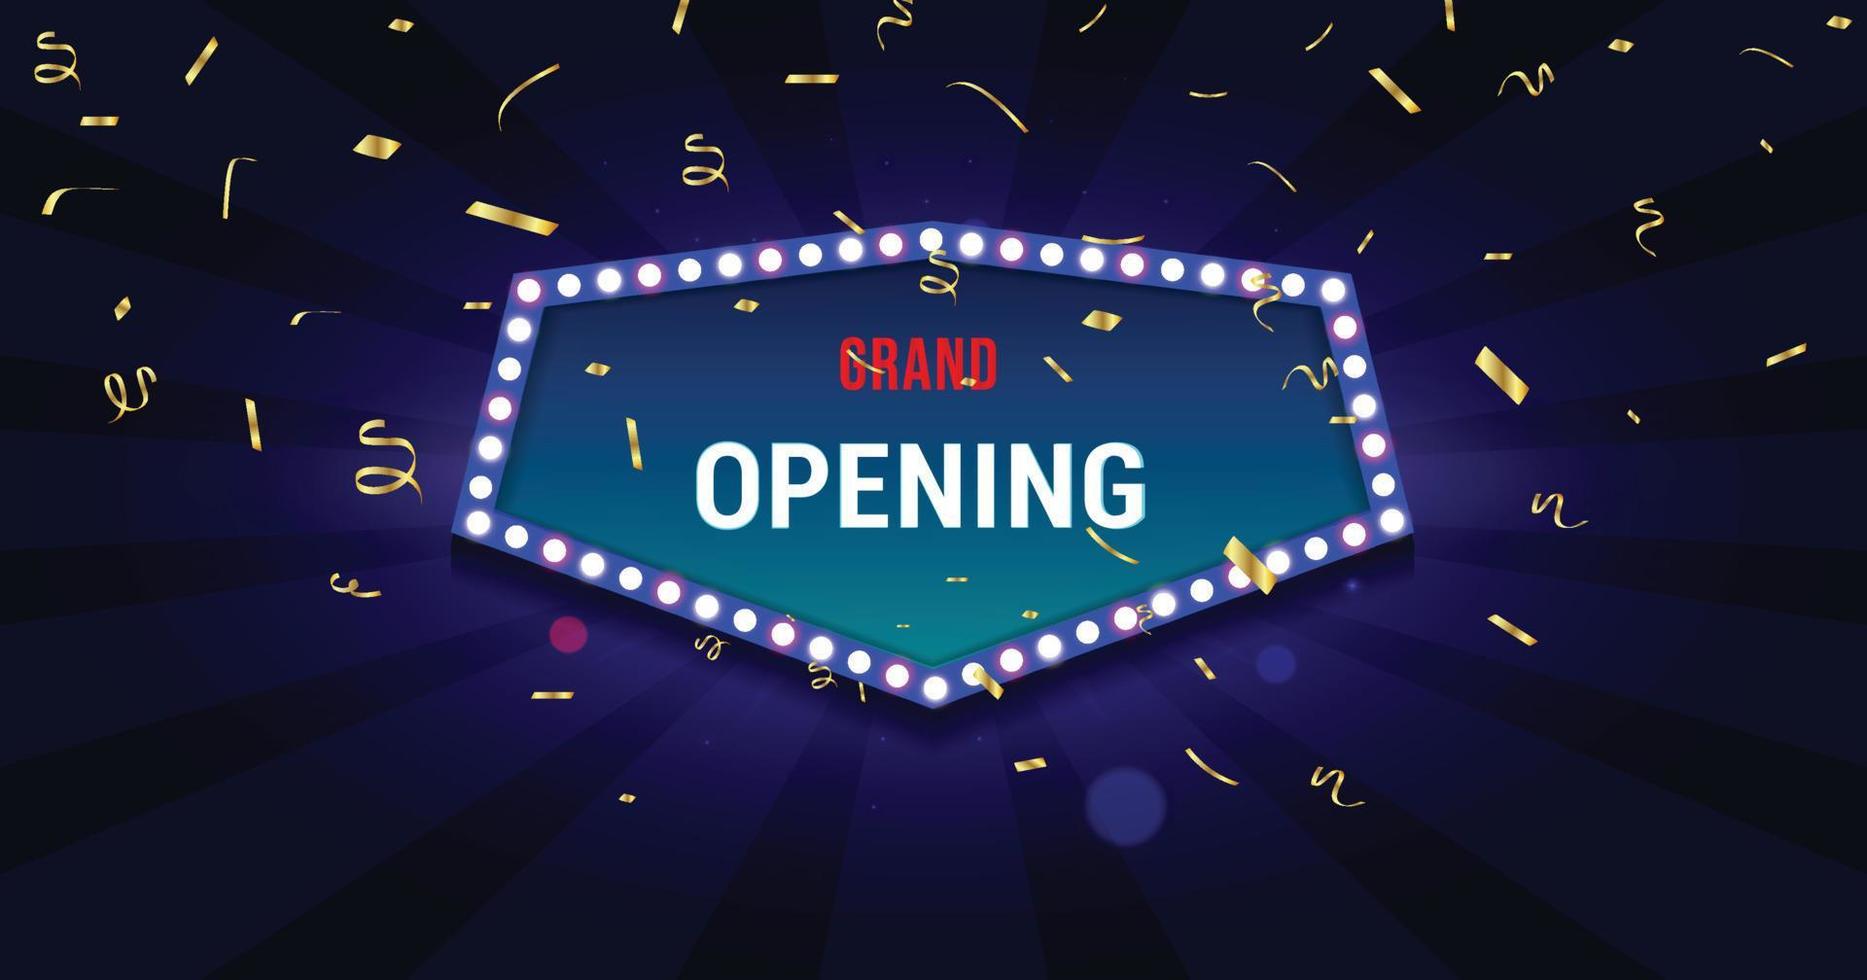 a grand opening card and a glowing blue background vector